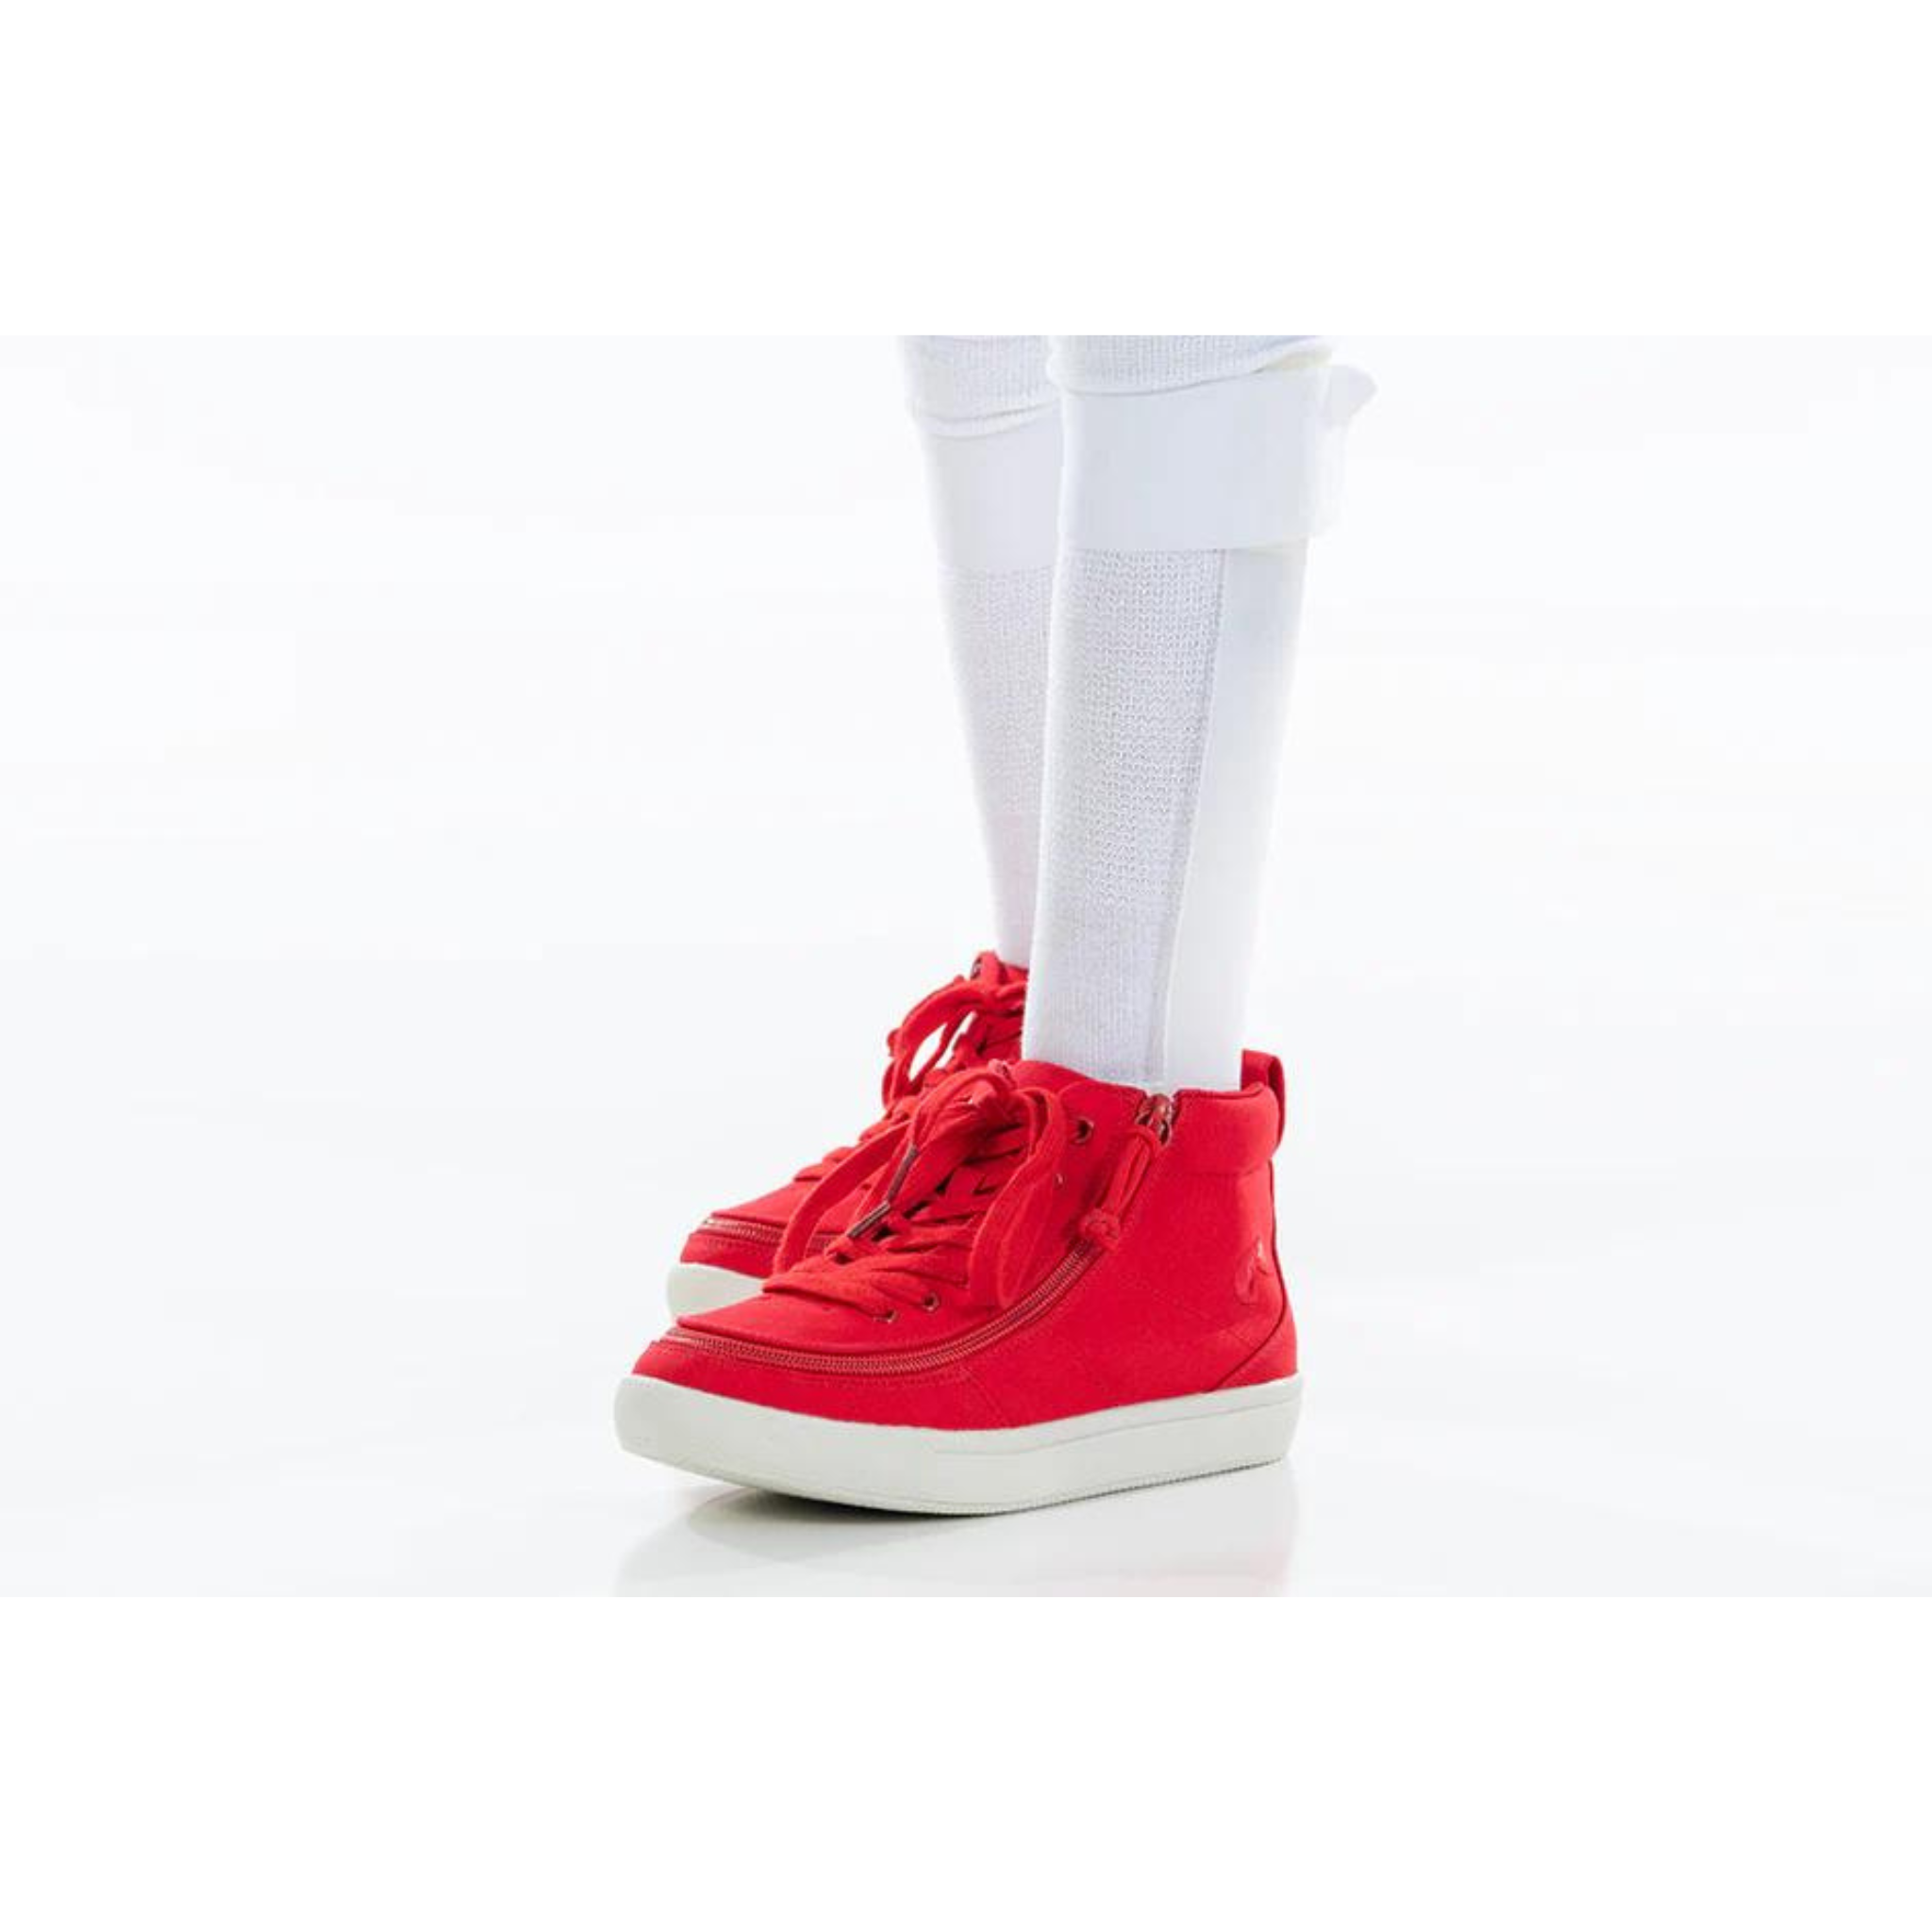 Billy Footwear (Kids) DR II Fit - High Top DR II Red Canvas Shoes